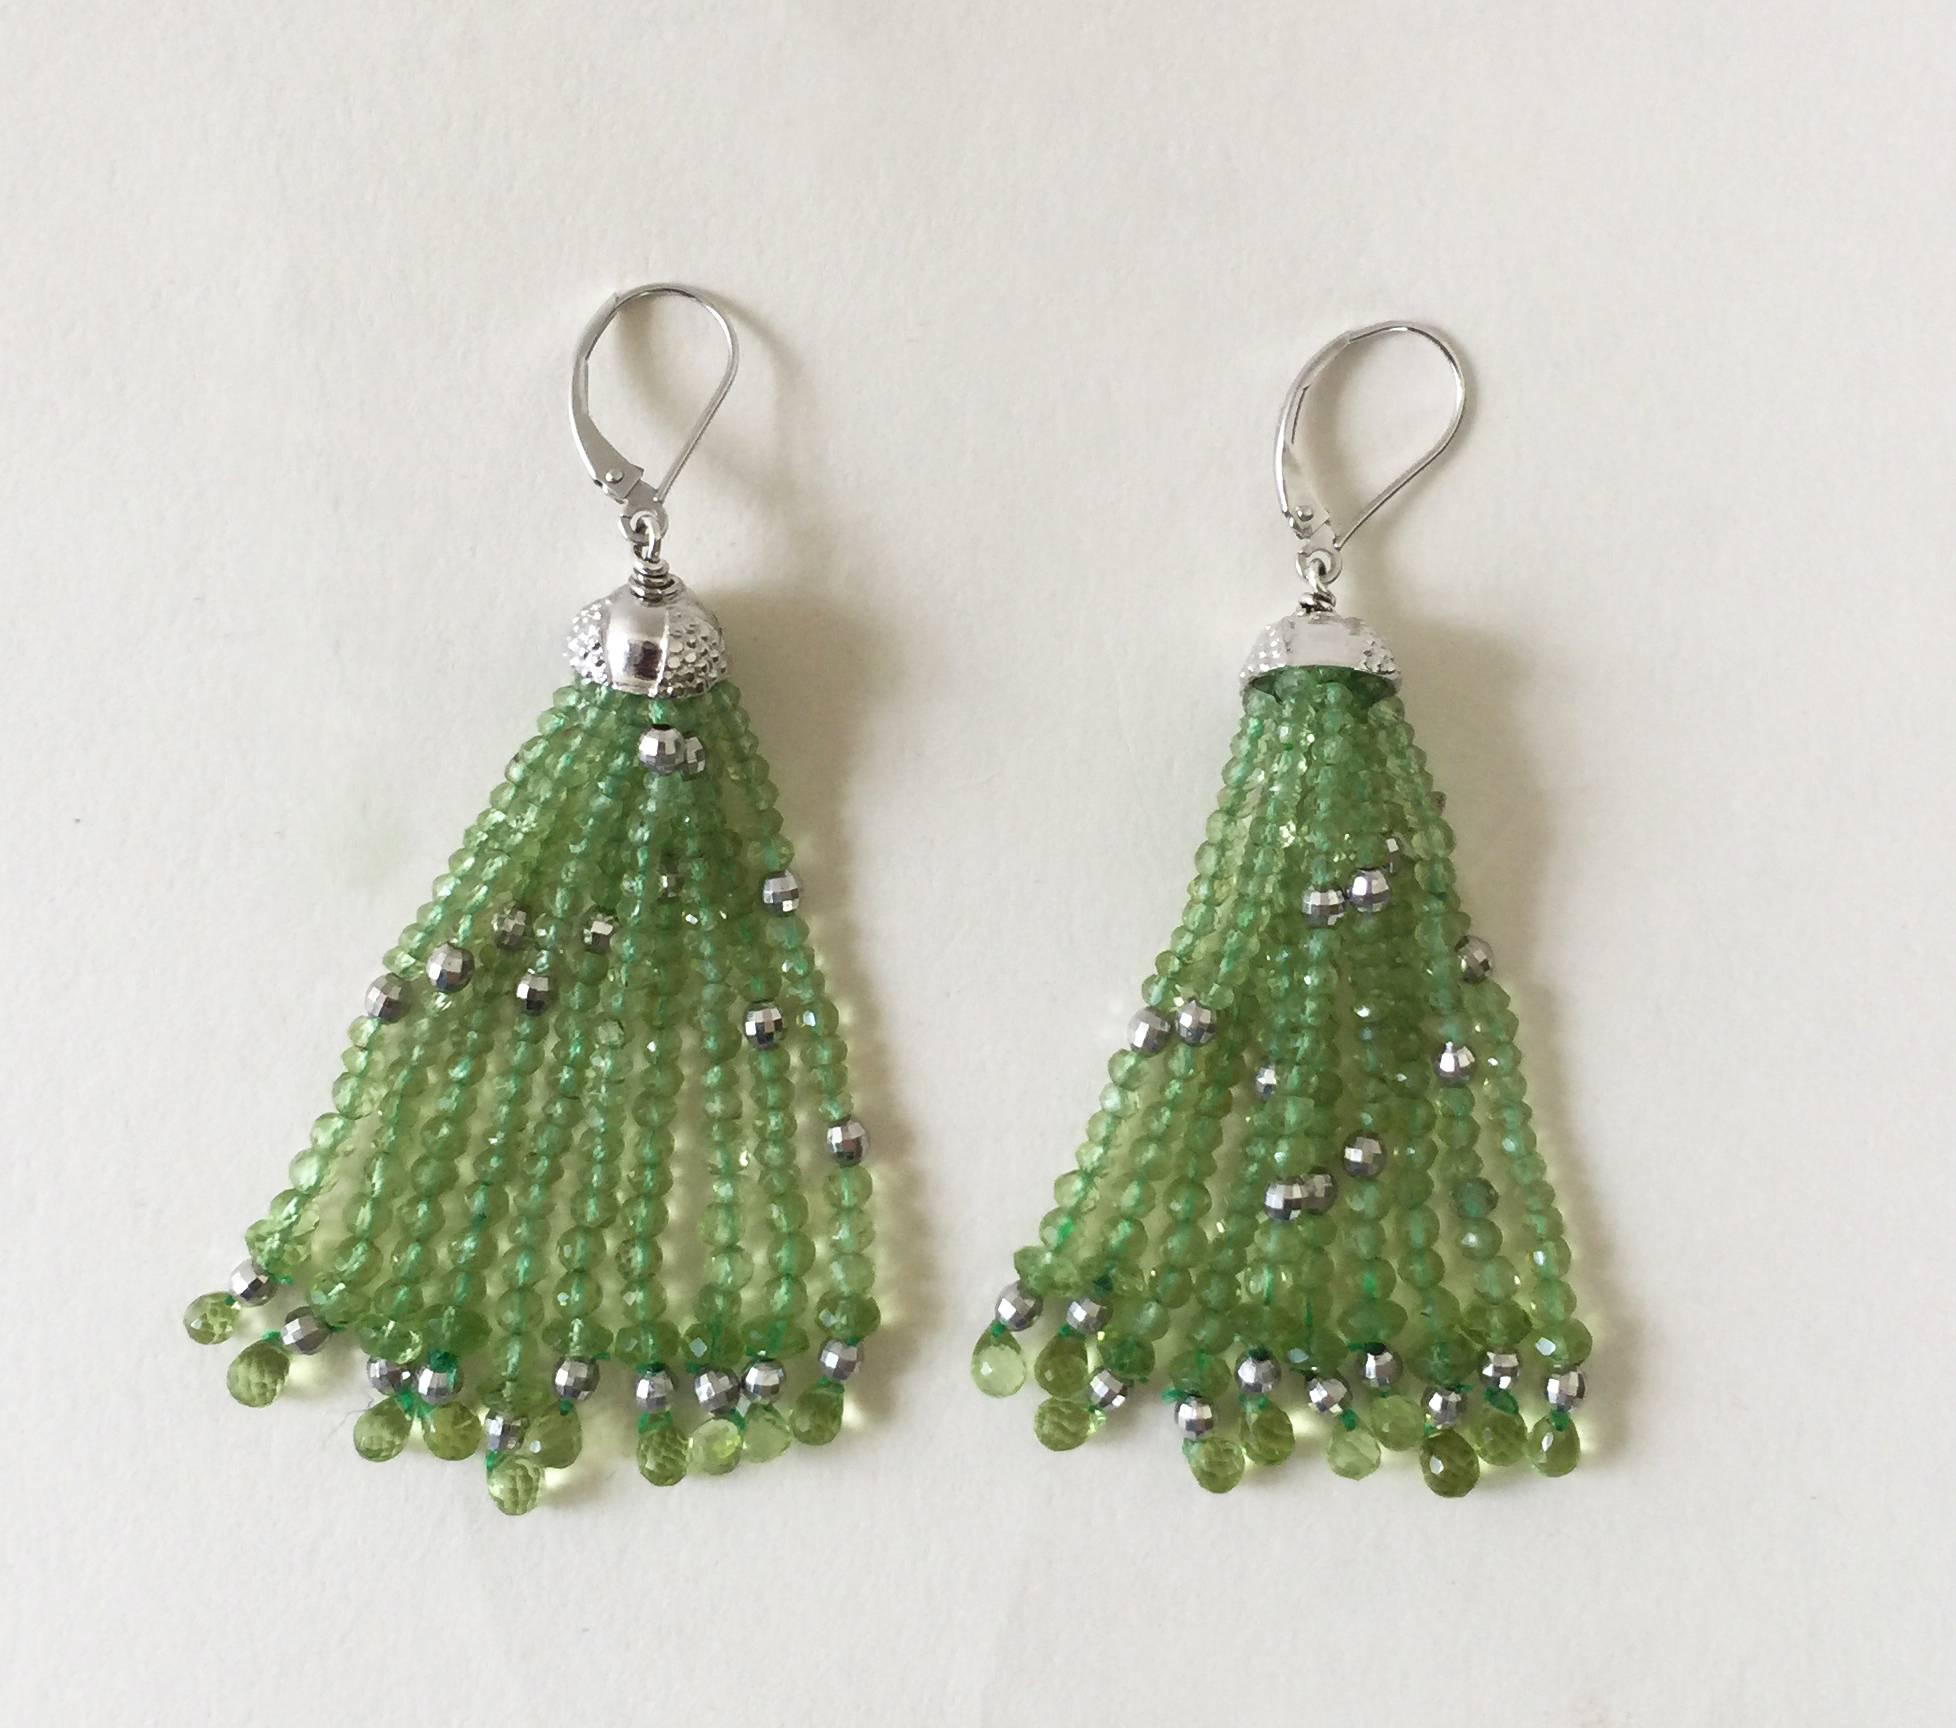 Bead Marina J Faceted Period beads and Briolets with Silver cups Tassel Earrings 